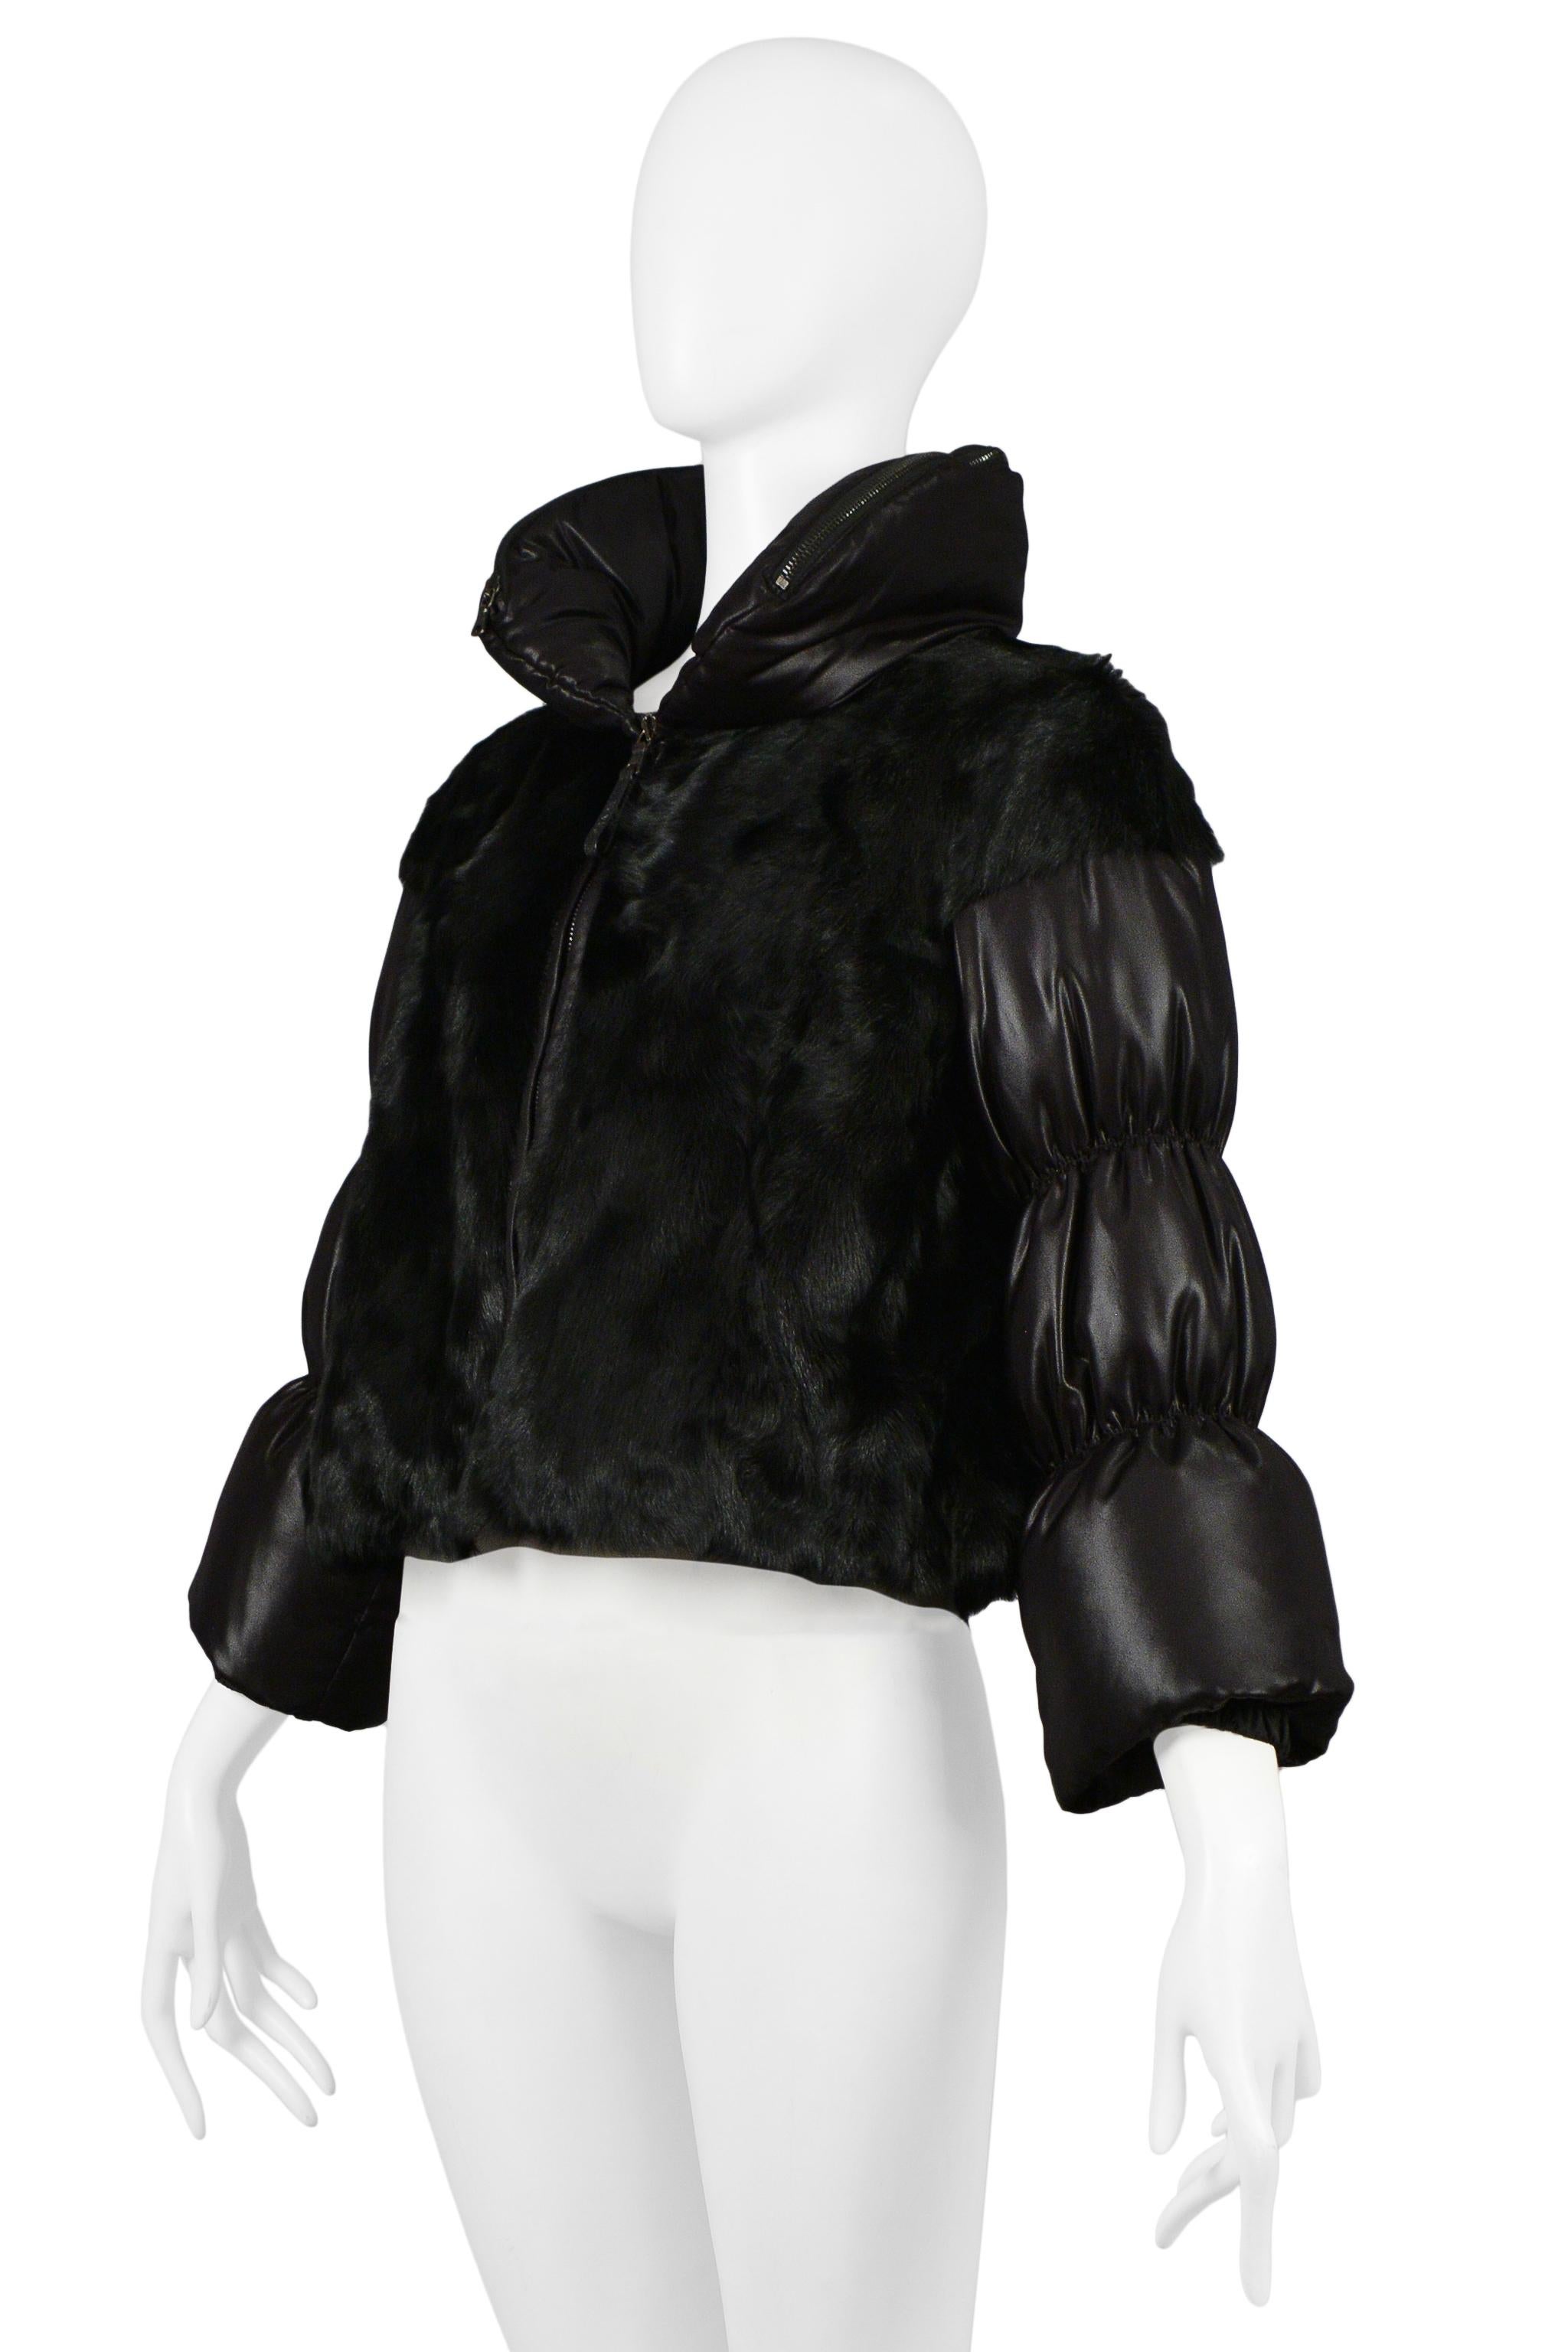 Prada Black Goat Fur Puffer Jacket In Excellent Condition For Sale In Los Angeles, CA